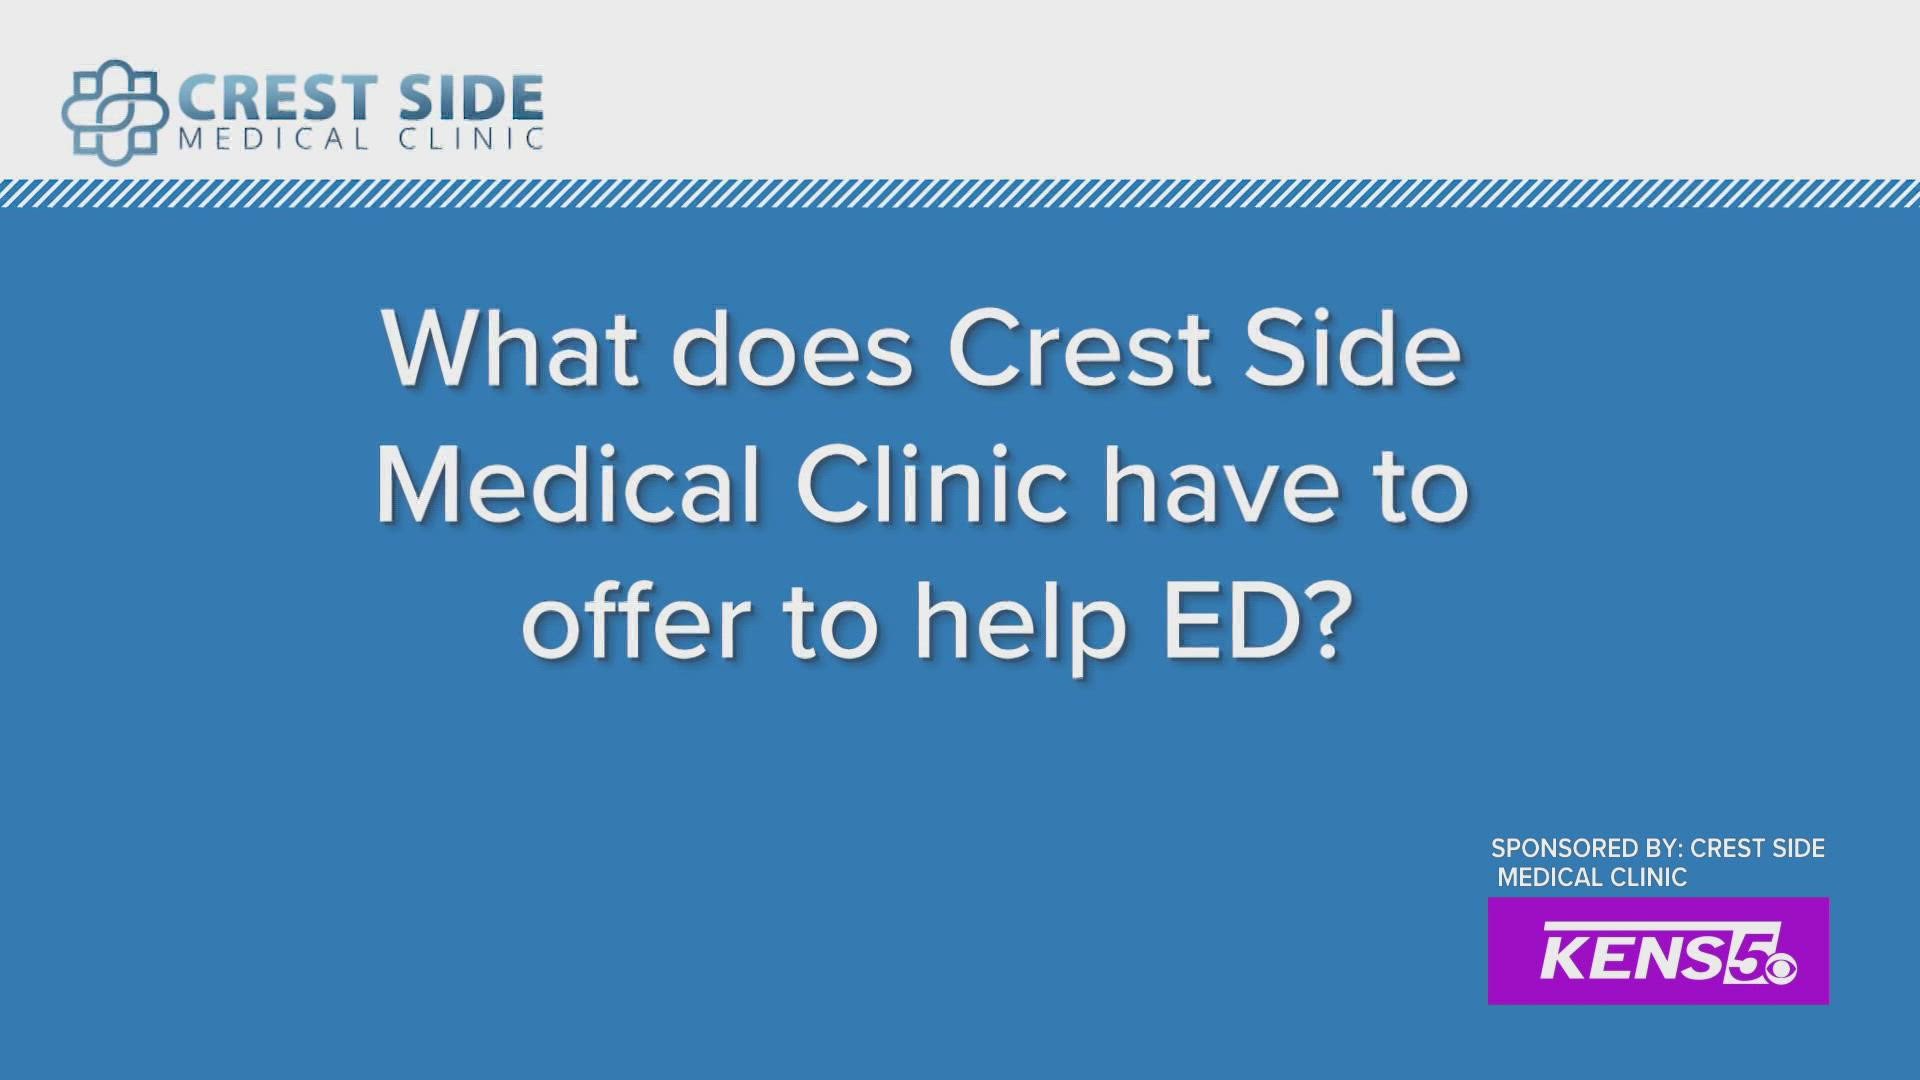 Sponsored by: Crest Side Medical Clinic